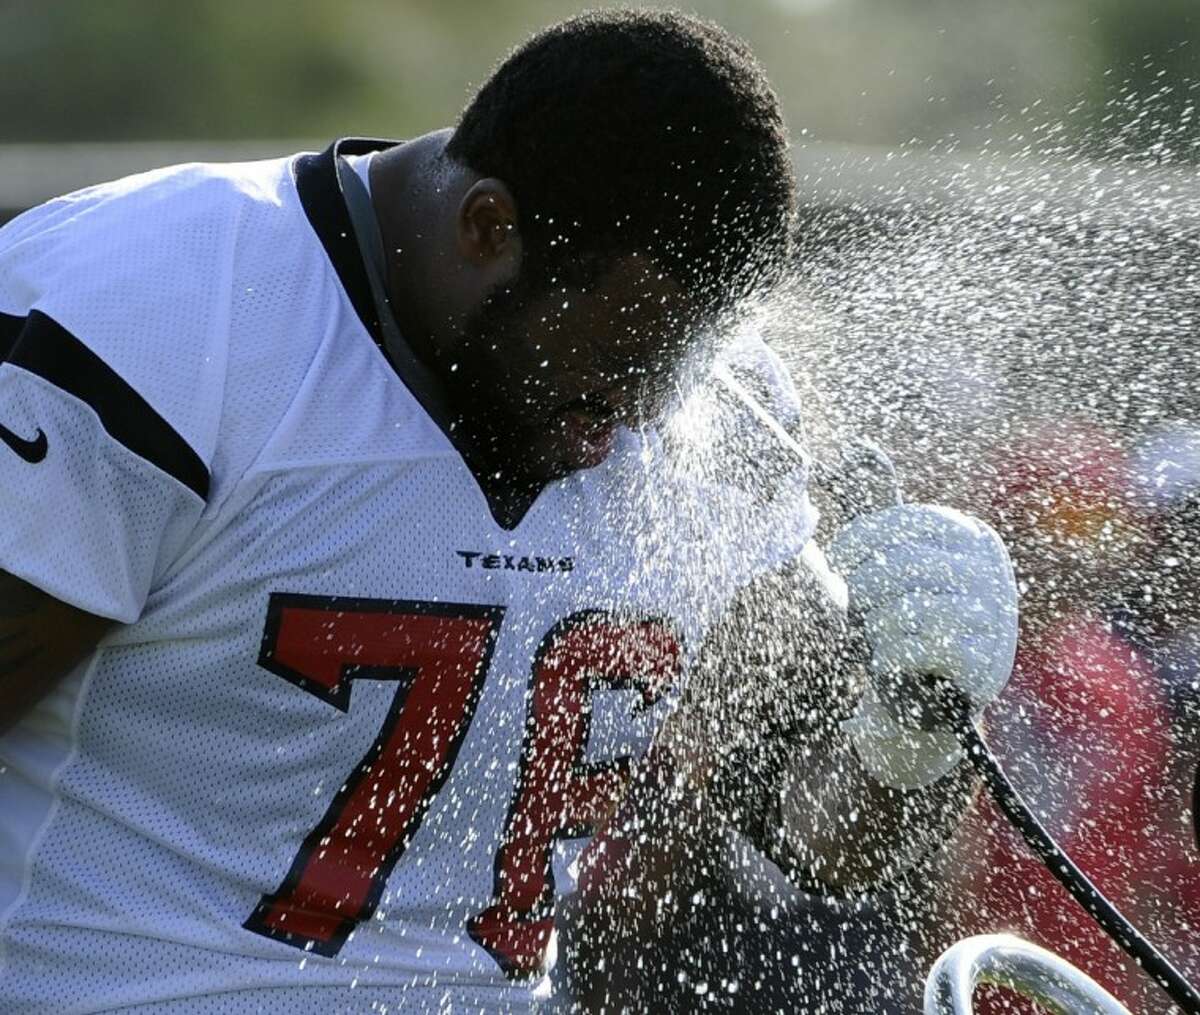 The Houston Texans’ Duane Brown cools off during training camp on July 29 in Houston.